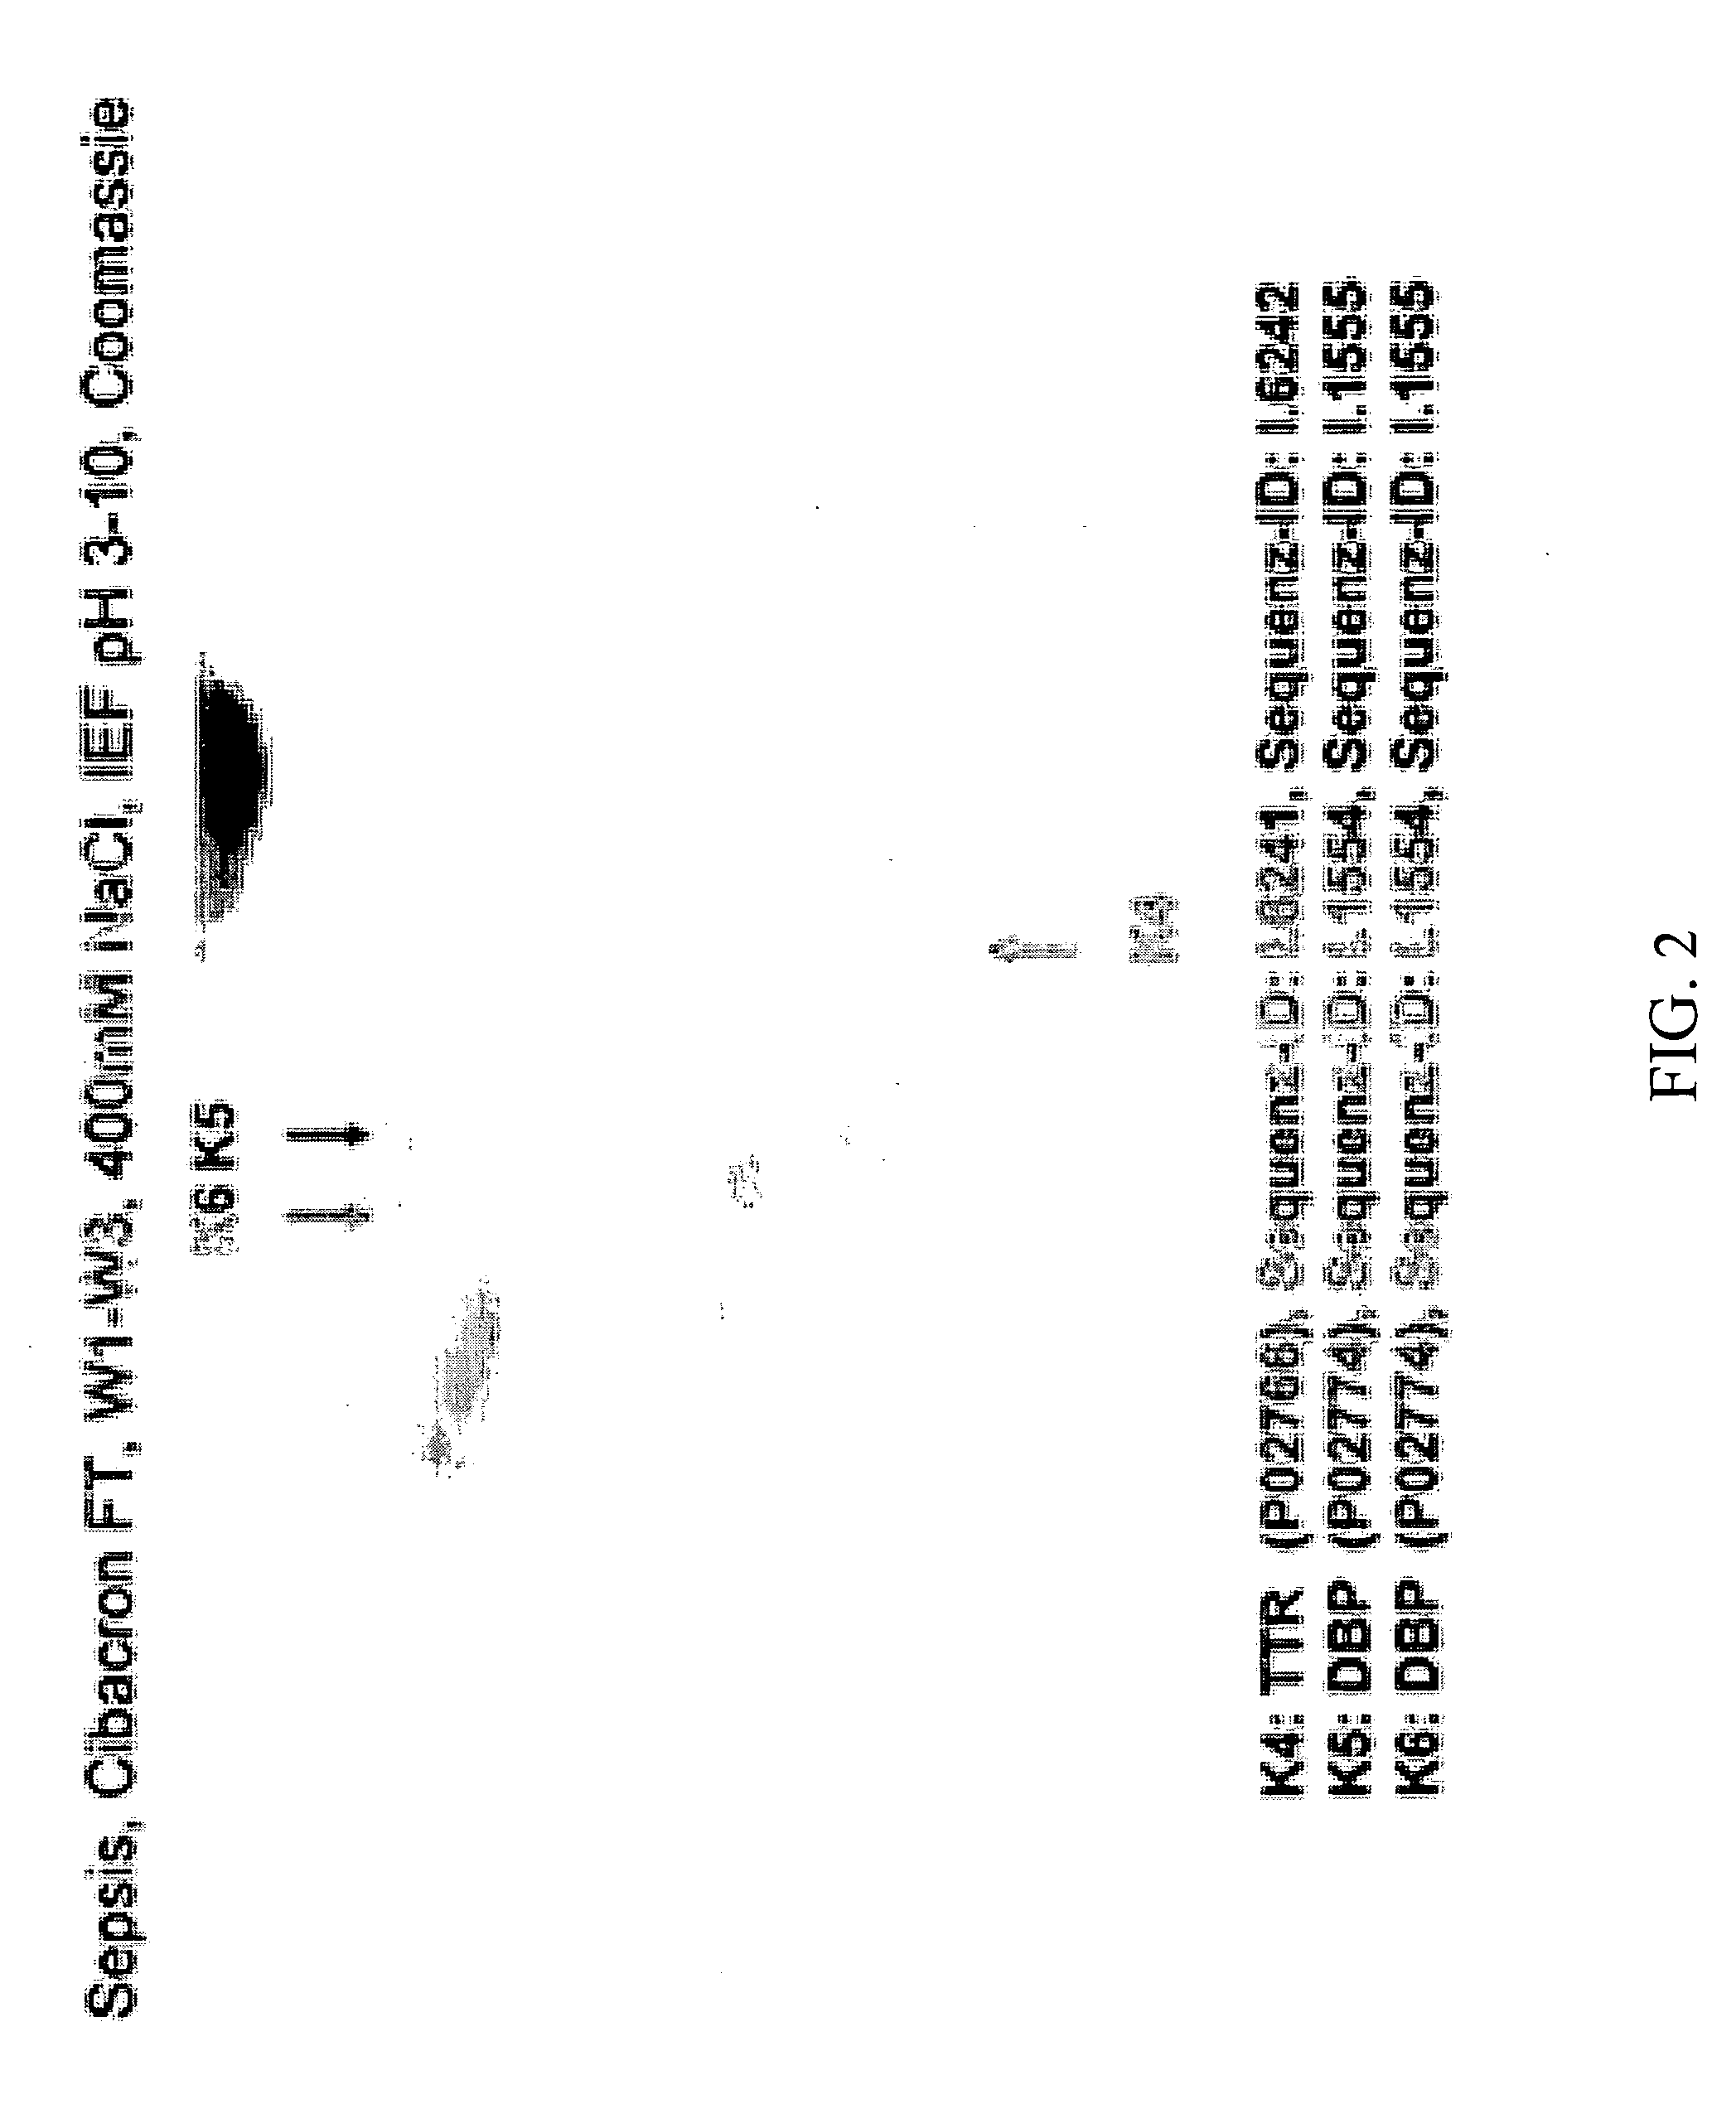 Method for Recognizing Acute Generalized Inflammatory Conditions (Sirs), Sepsis, Sepsis-Like Conditions and Systemic Infections